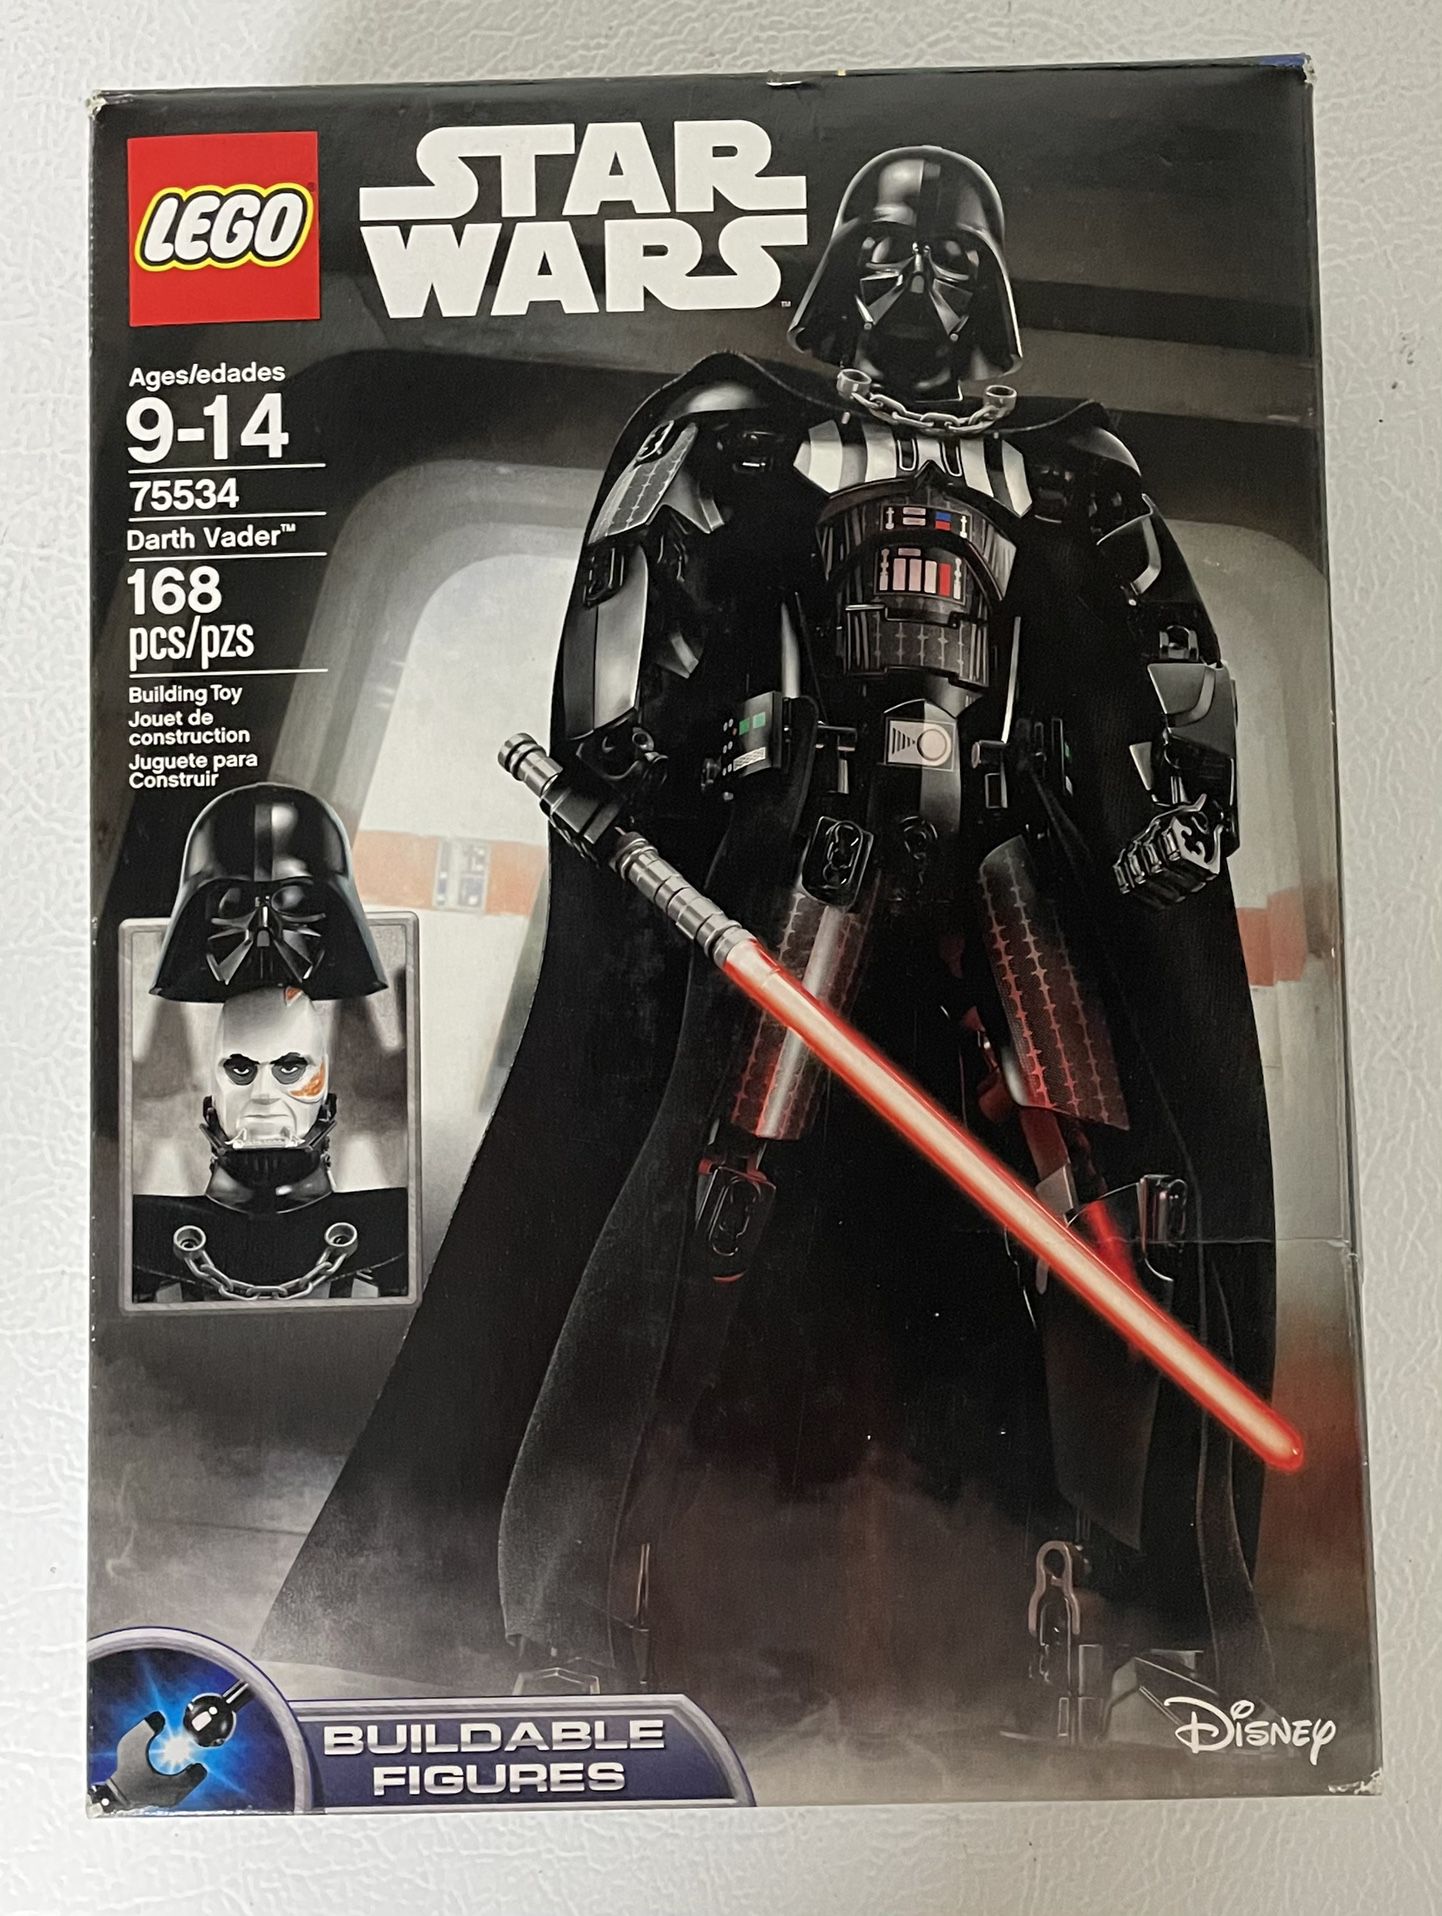 Lego Star Wars Darth Vader Building Kit 75534 Model Box for Sale in Willoughby Hills, - OfferUp